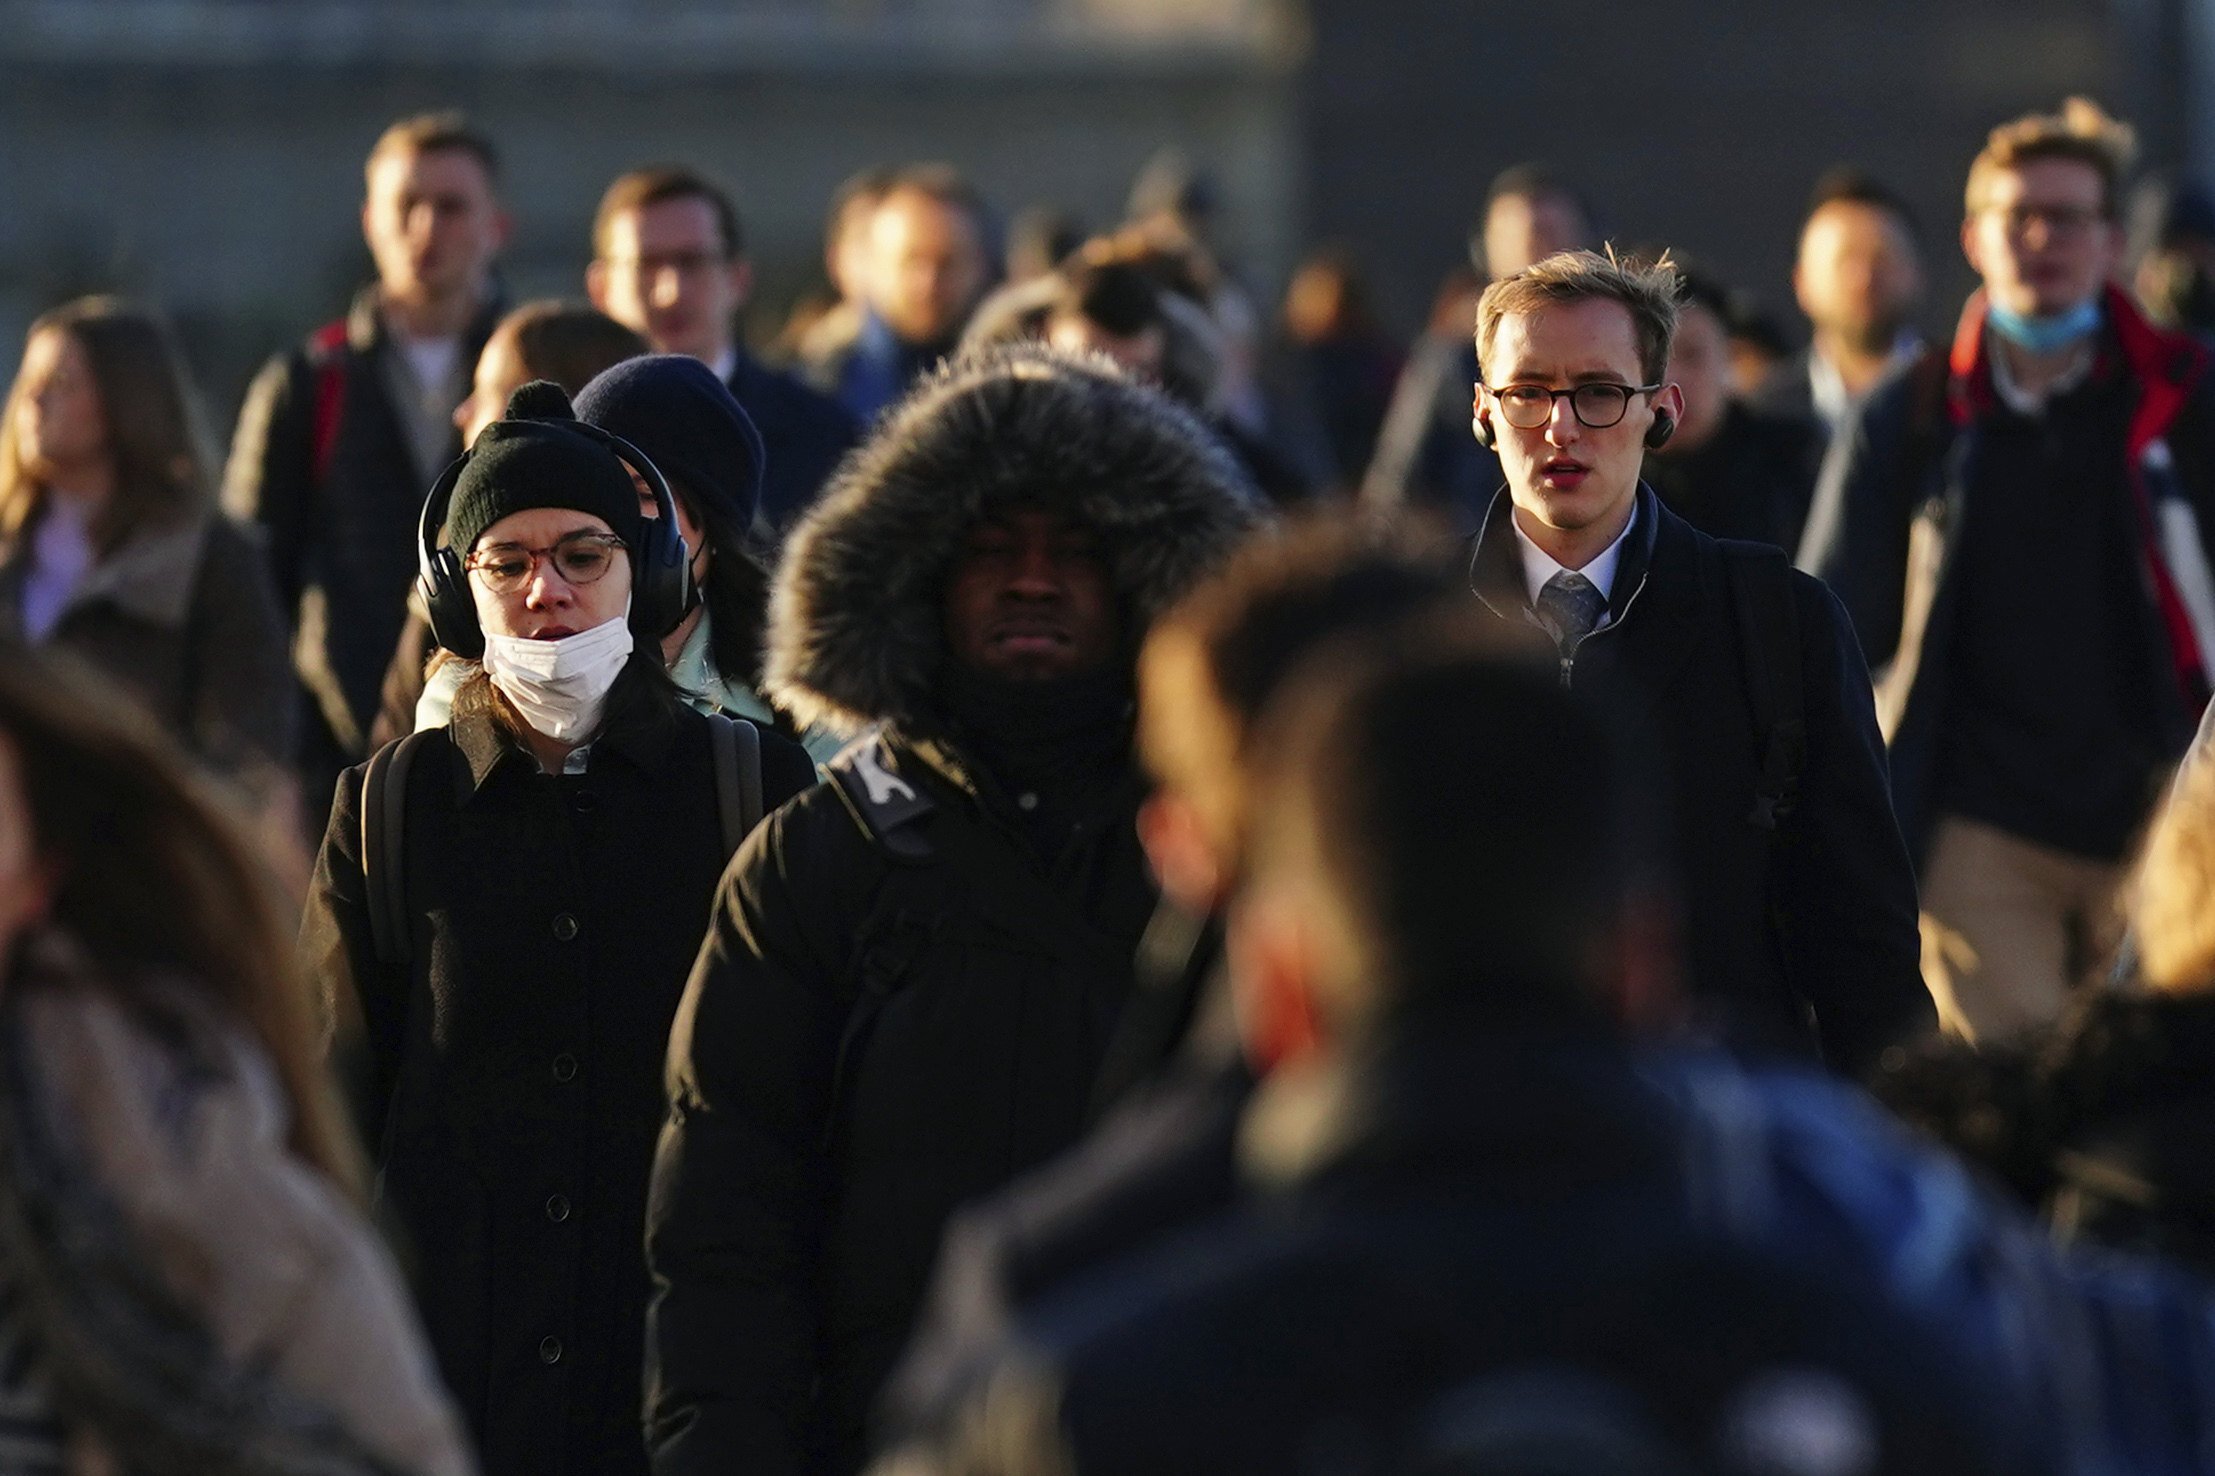 Commuters on London Bridge make their way into offices on January 20, after advice to work from home was dropped by Britain’s Prime Minister Boris Johnson. Photo: PA via AP